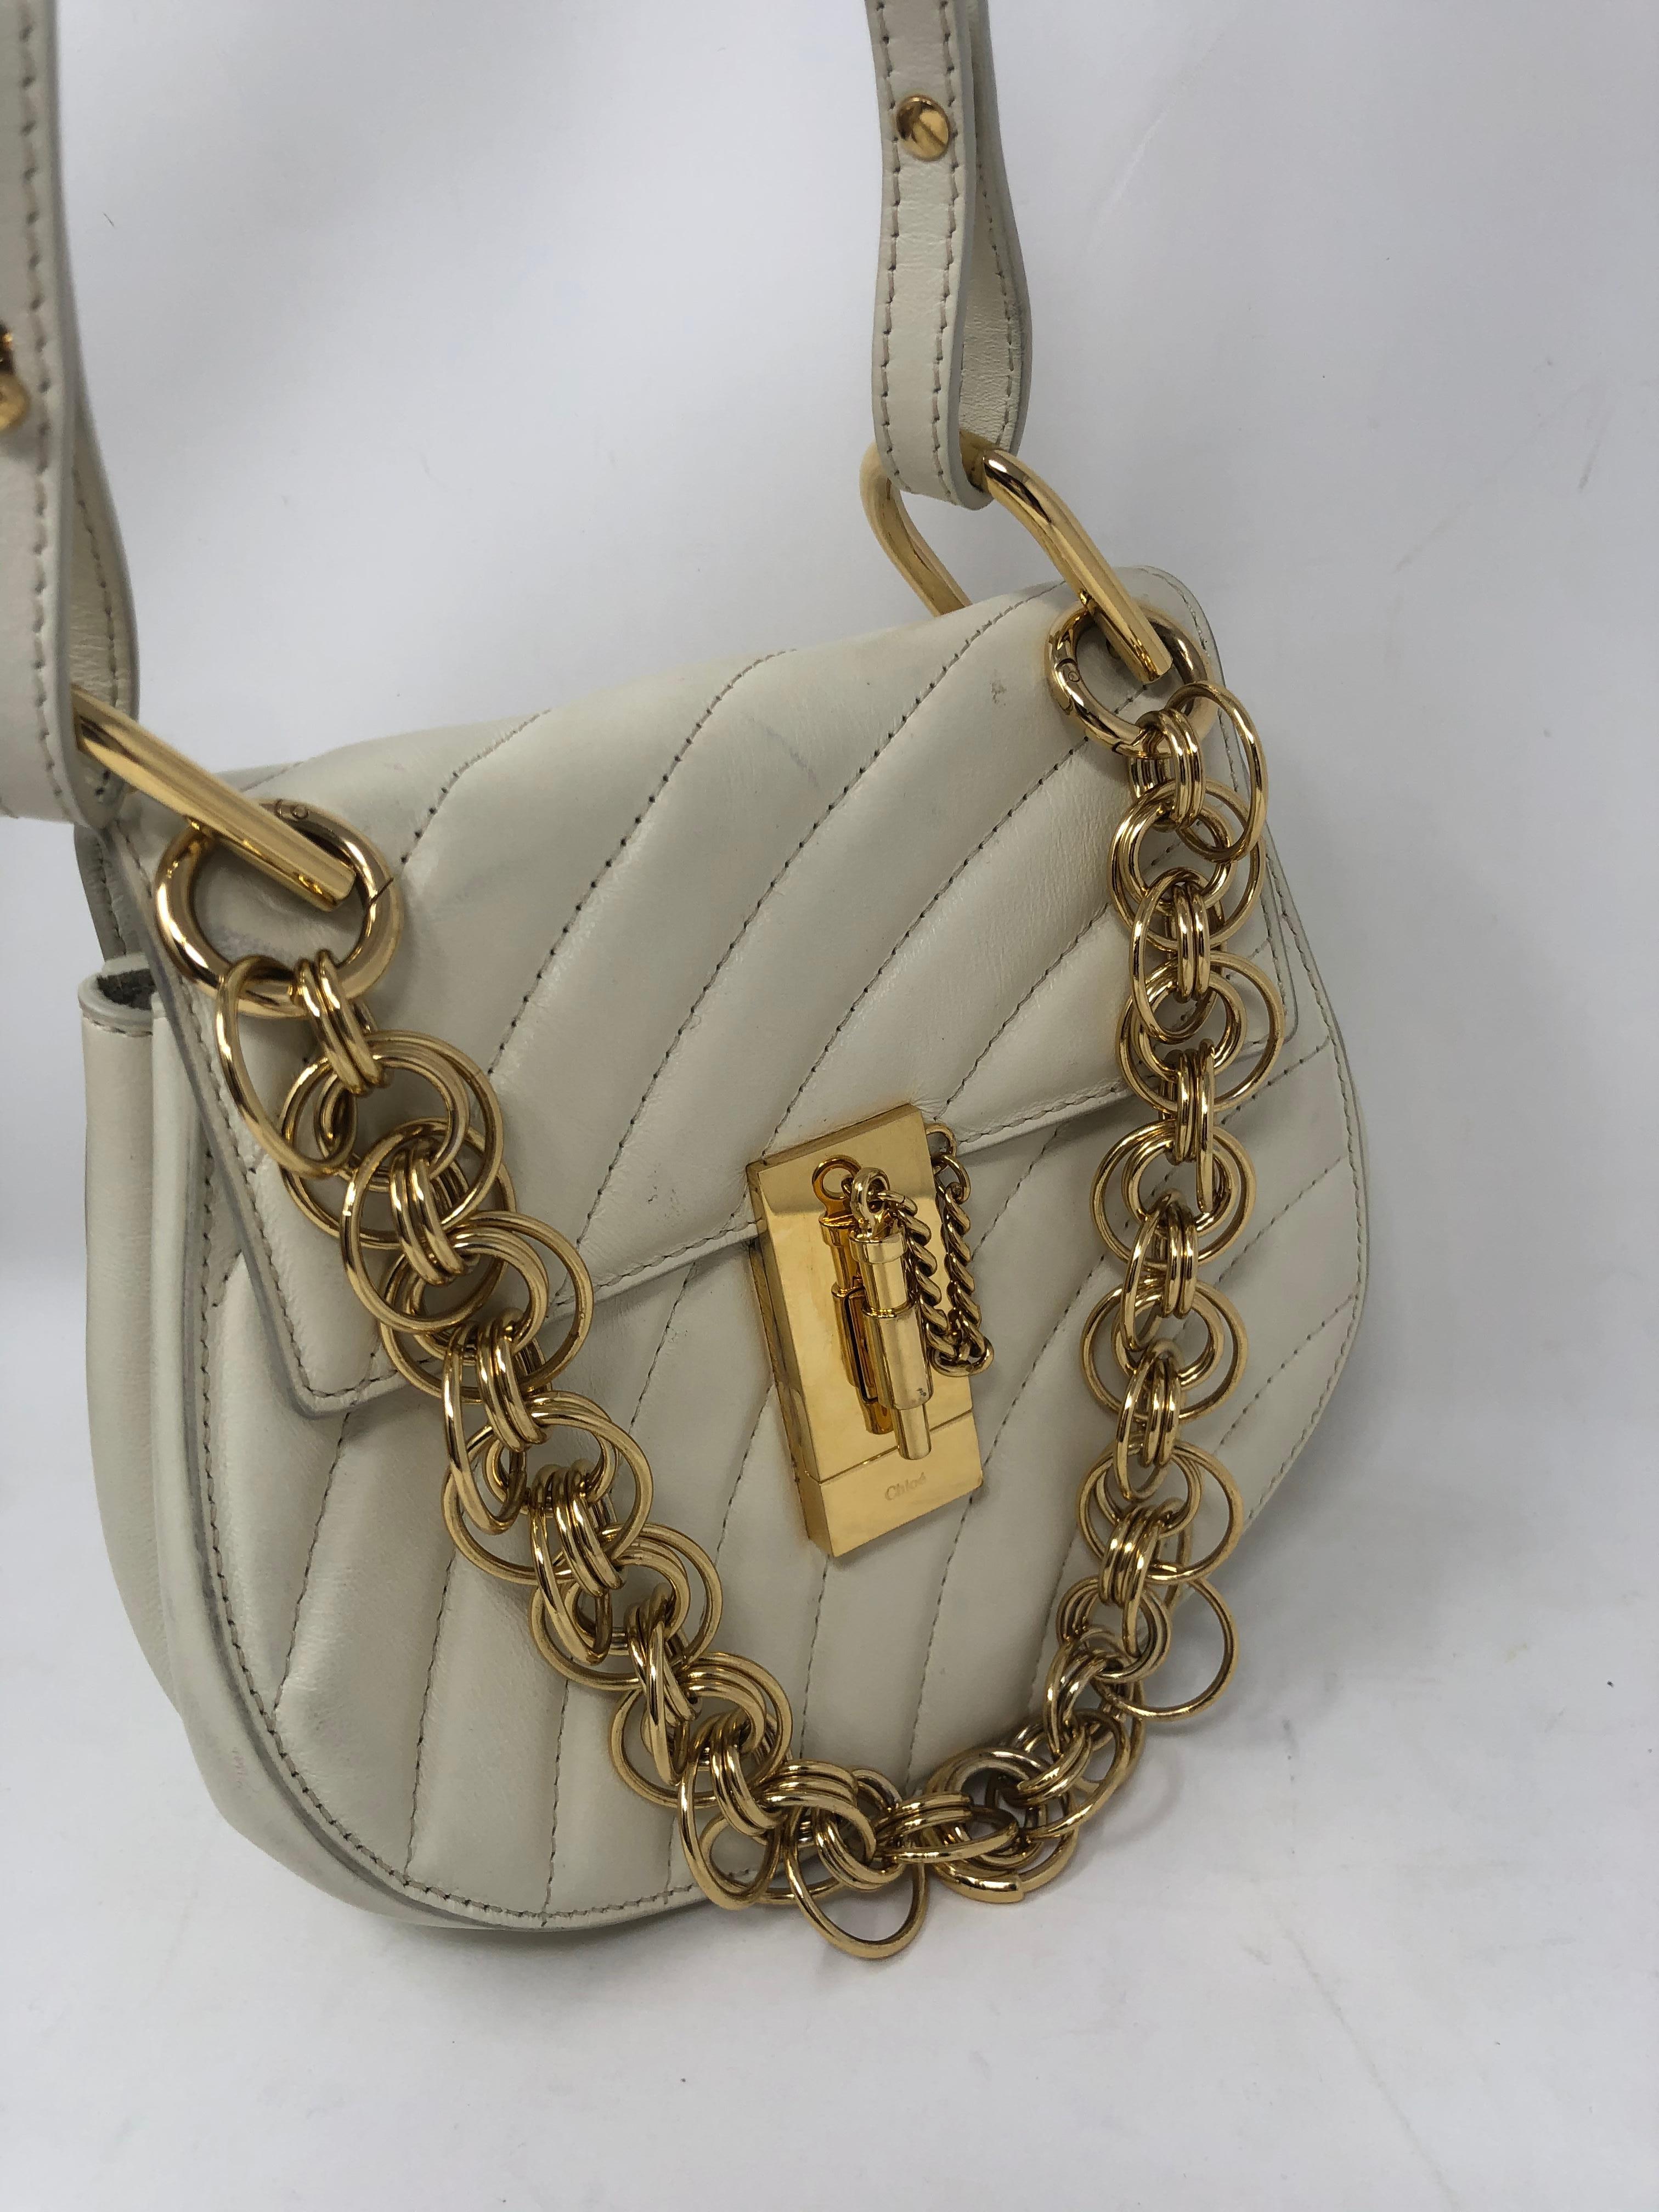 Chloe Cream Crossbody 2 Way Bag. Mini Drew style with extra gold chain in front. Cream leather bag with adjustable strap. Pretty gold hardware. Some minimal wear by hardware. Nice style and look from Chloe. Guaranteed authentic. 